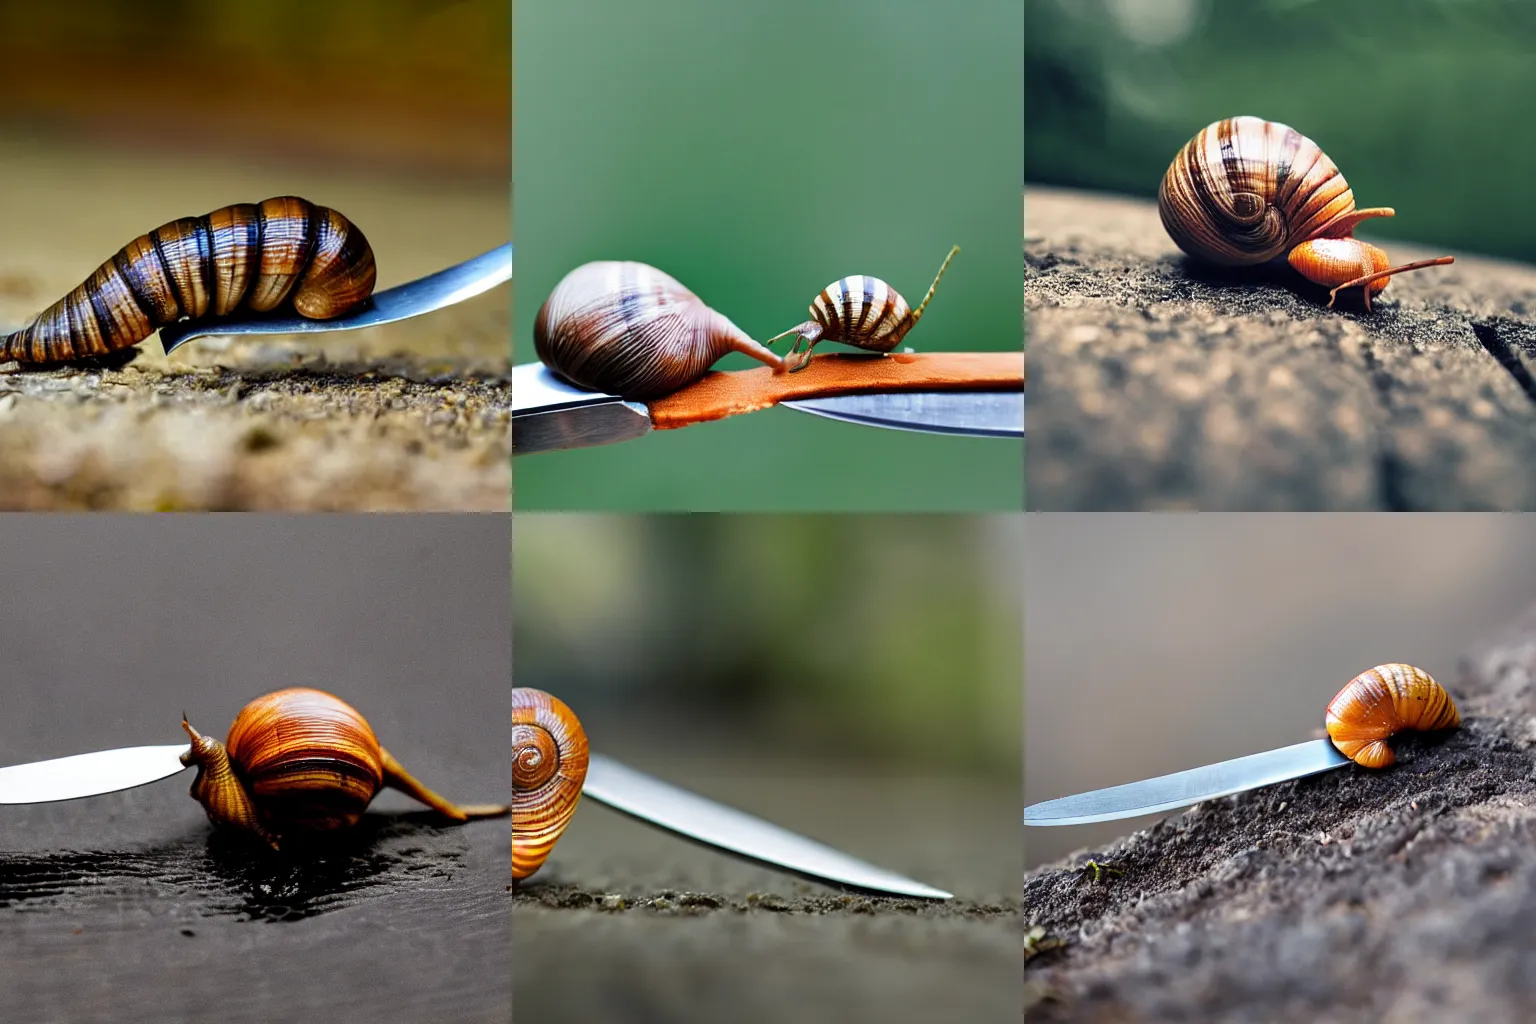 Prompt: A snail crawling on edge of a knife, award winning photography